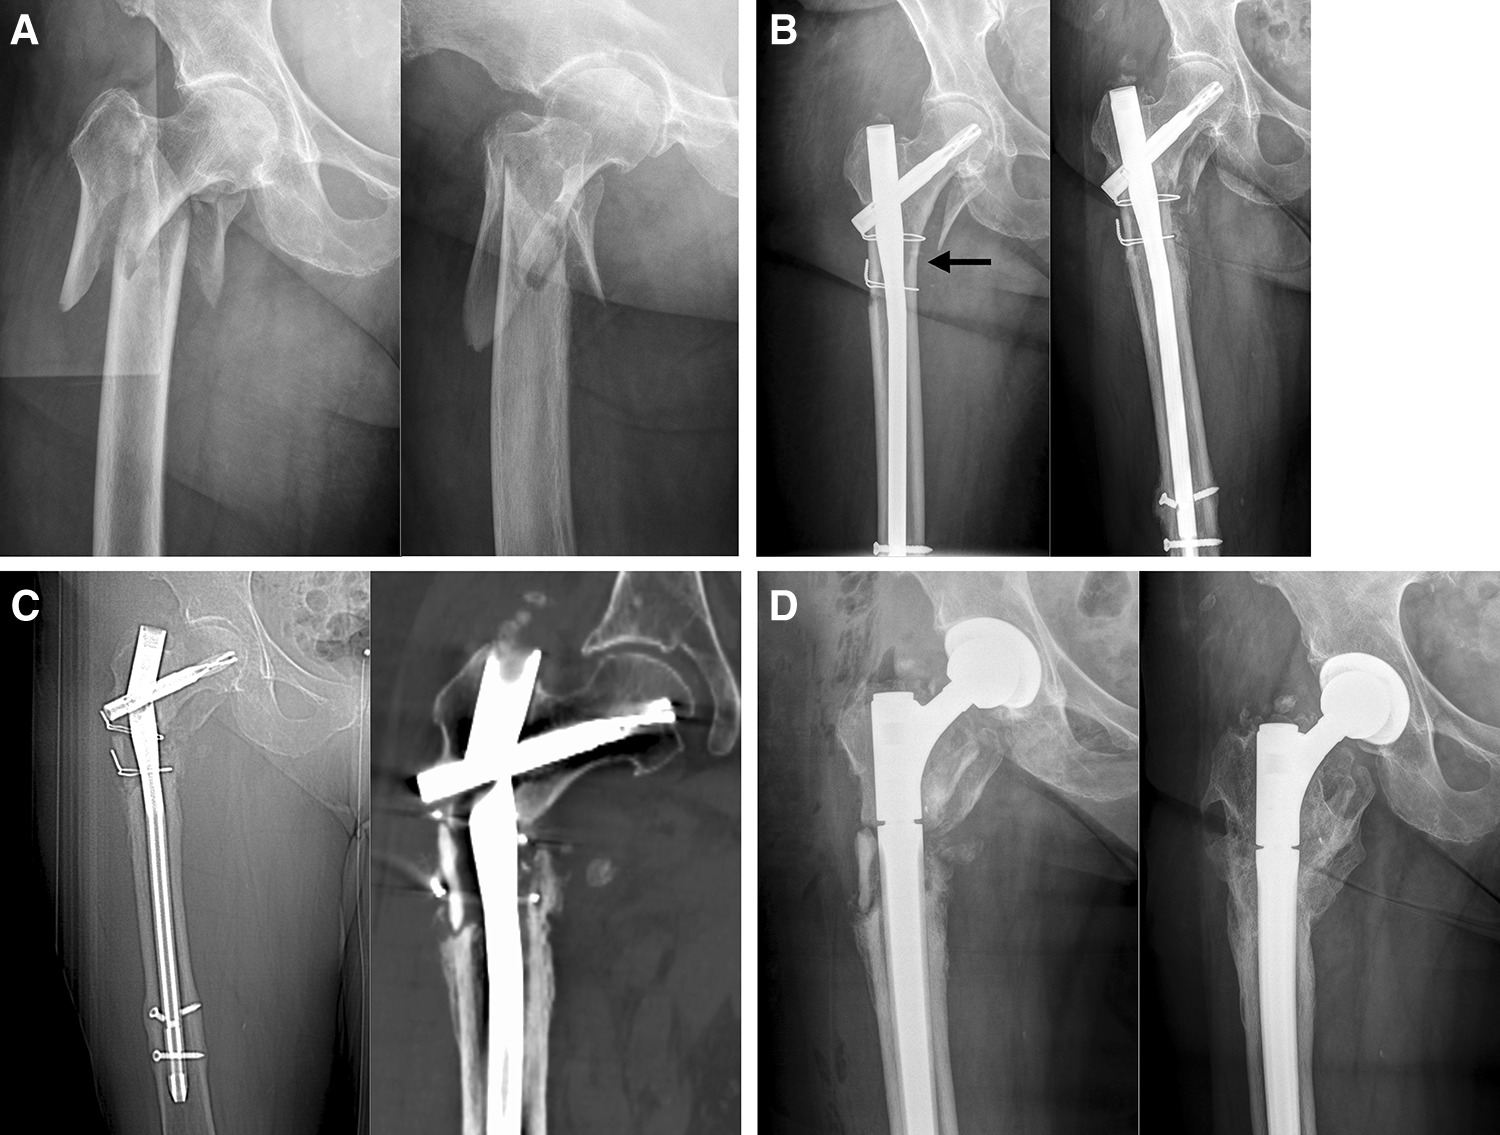 Tibial Shaft Fractures